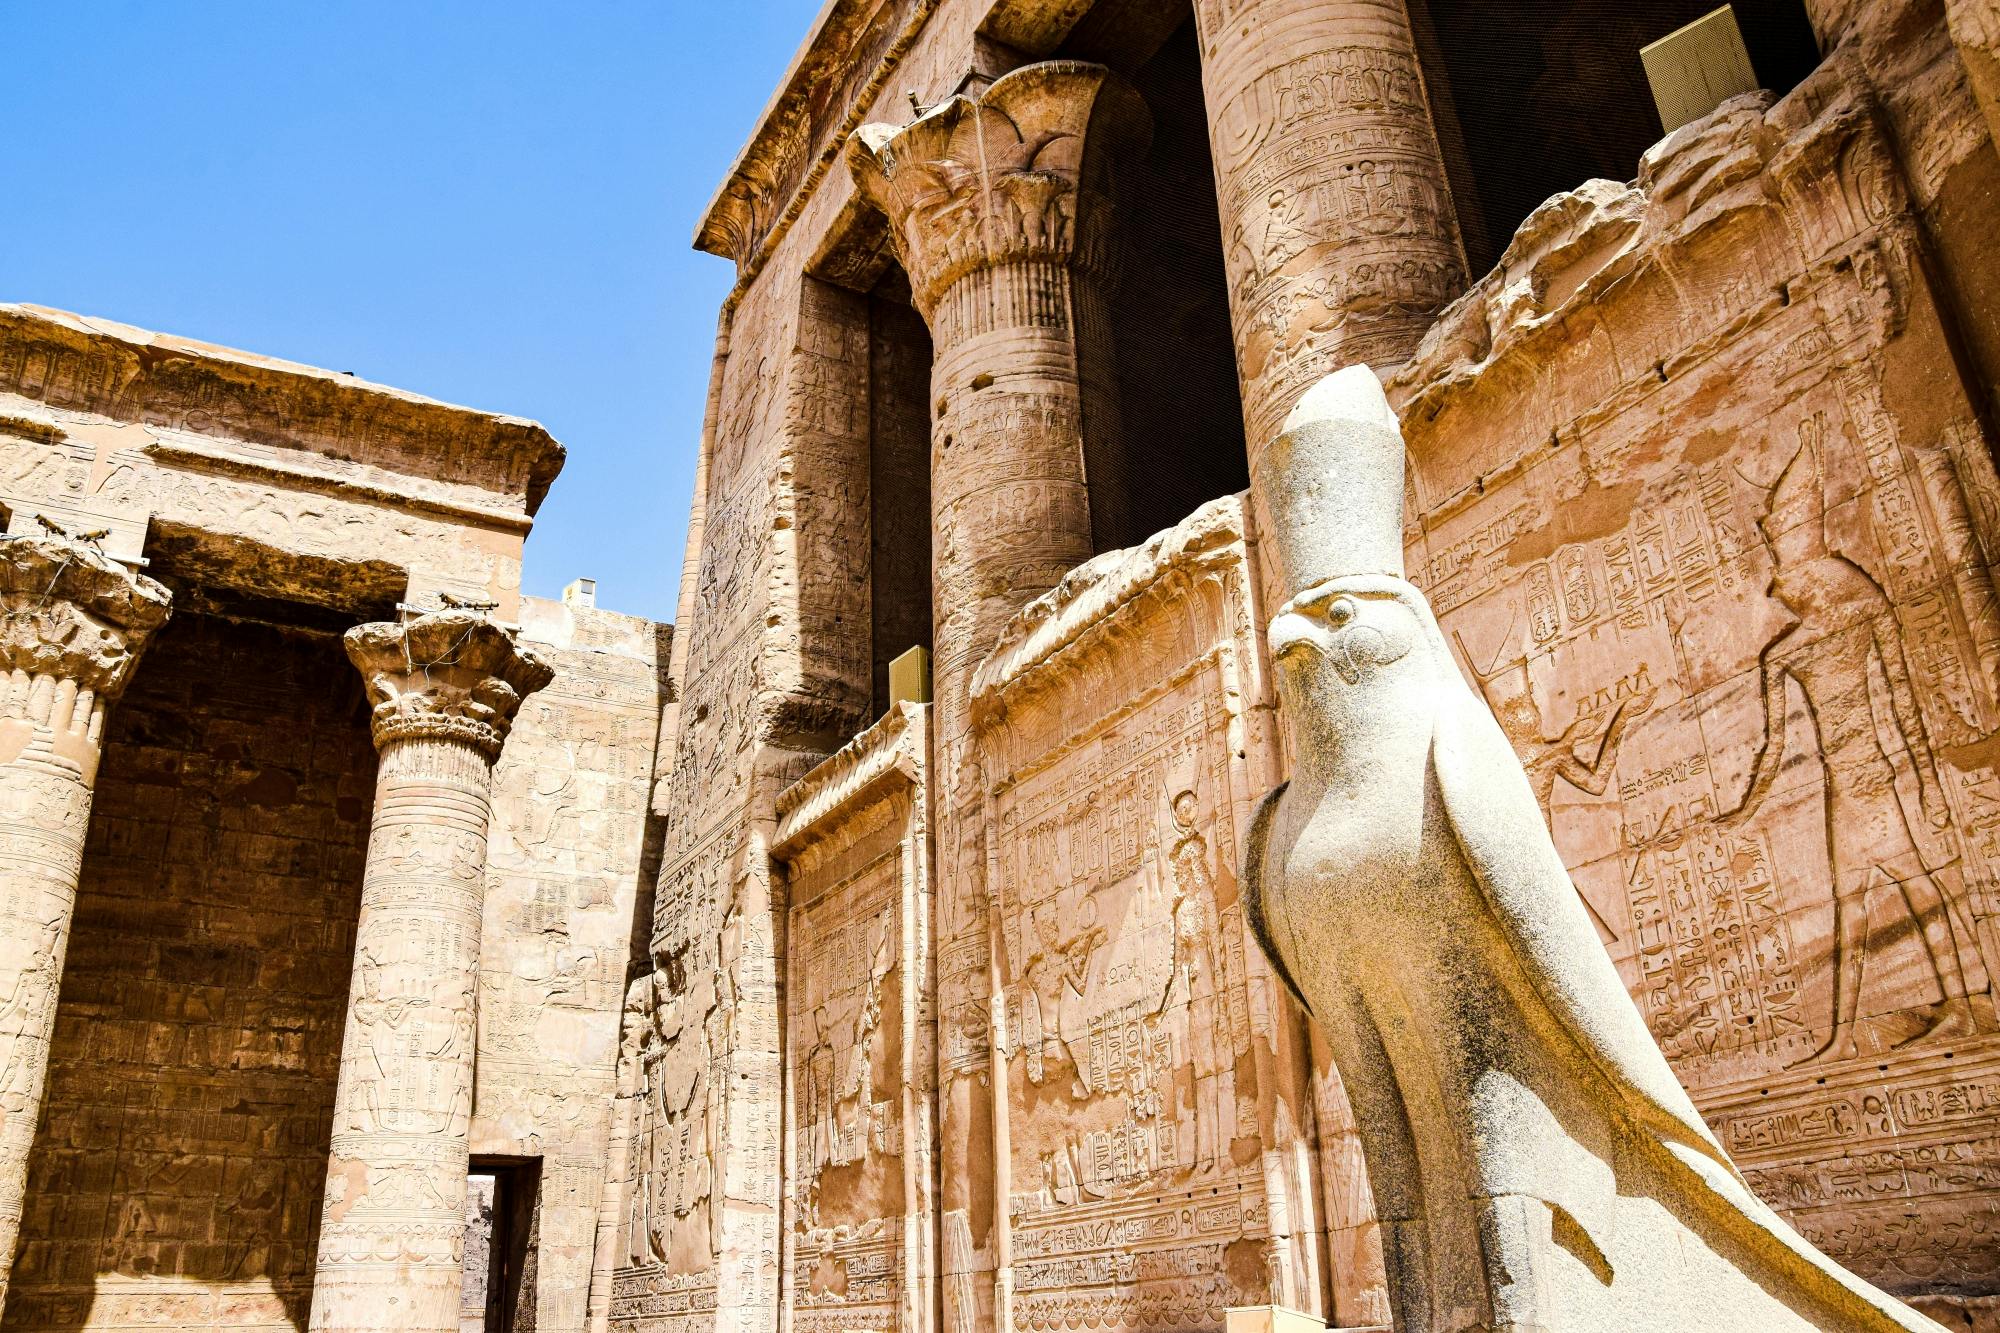 Full day guided tour of the temples Edfu and Esna from Luxor